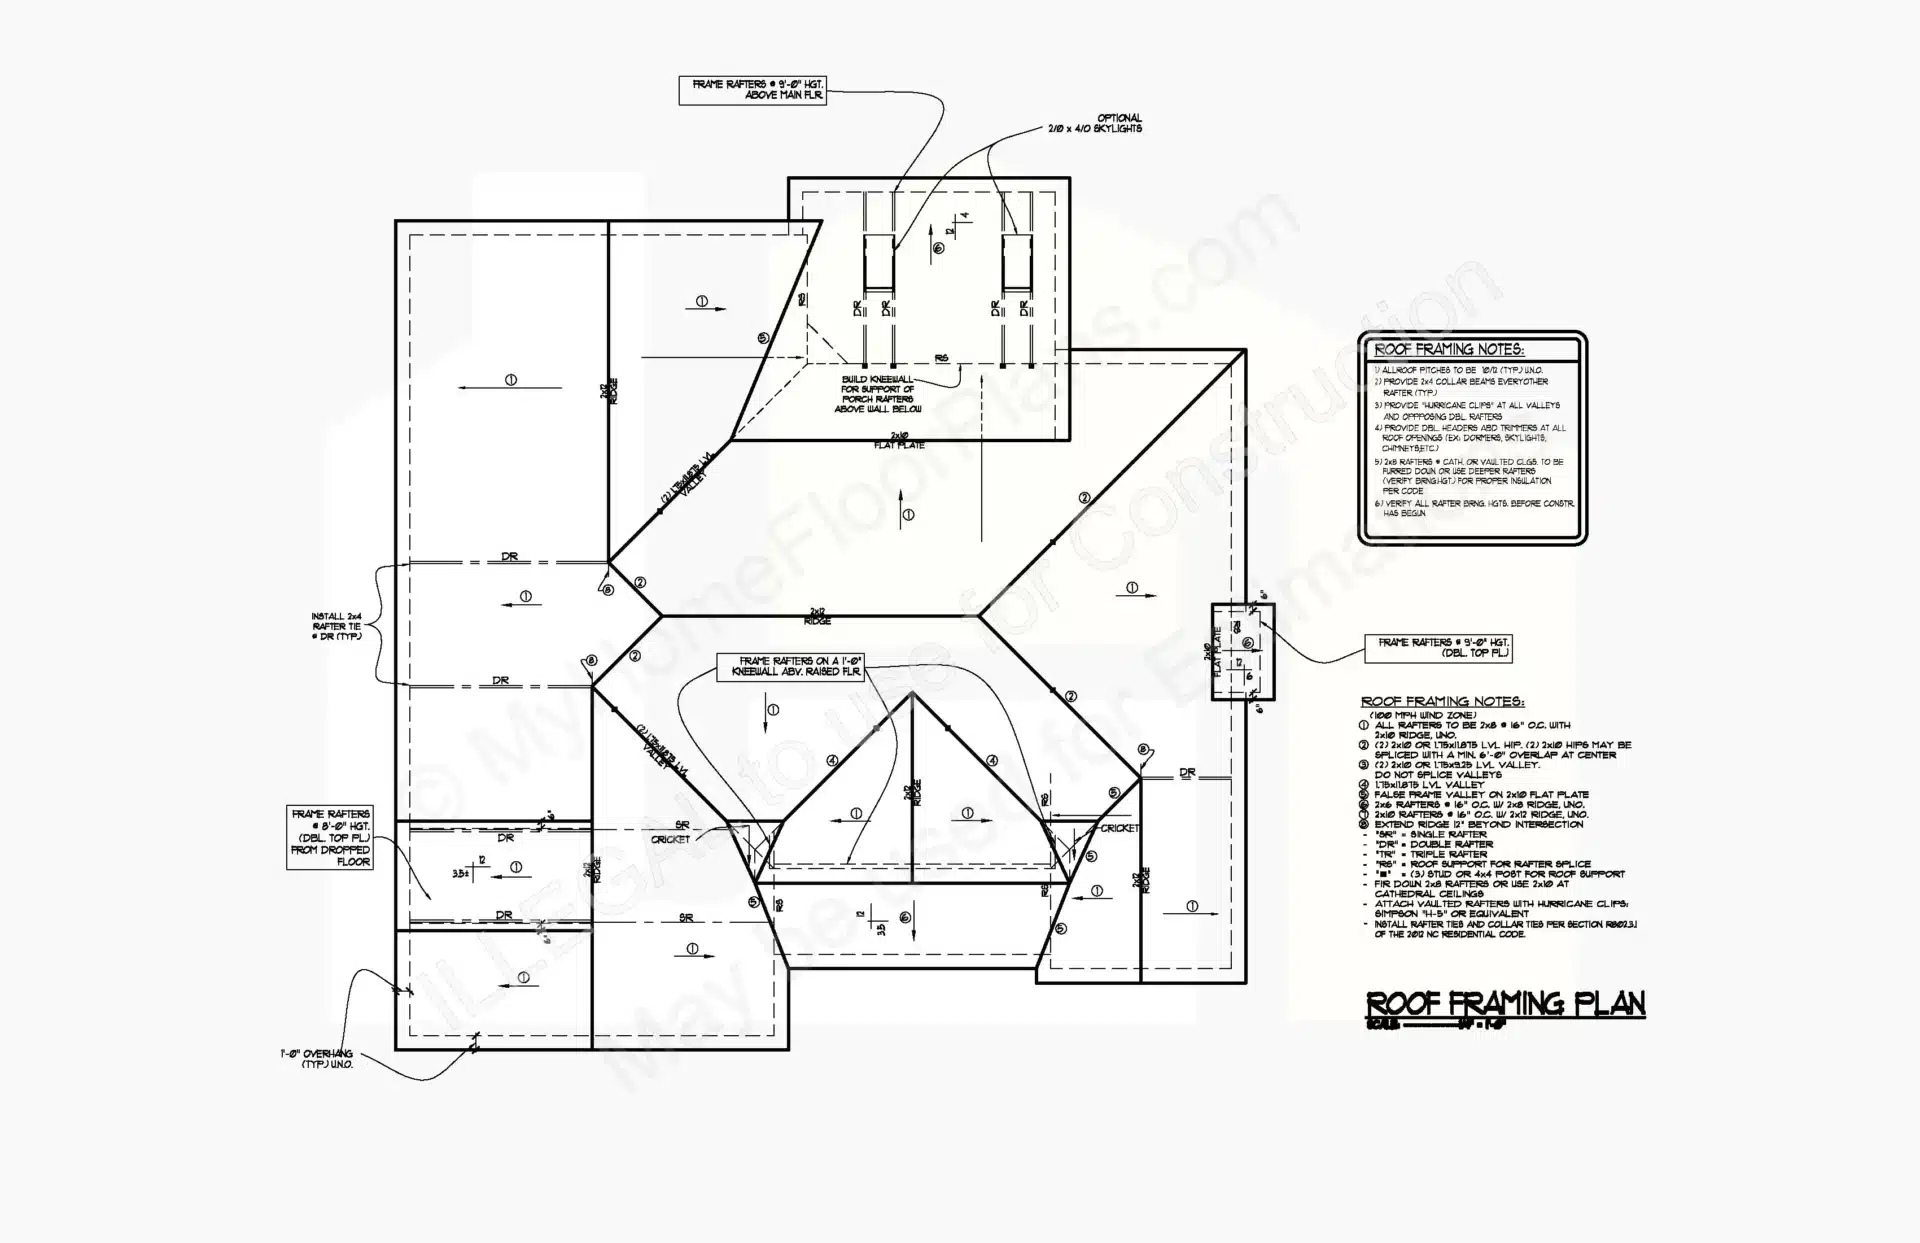 13-1336 my home floor plans_Page_10